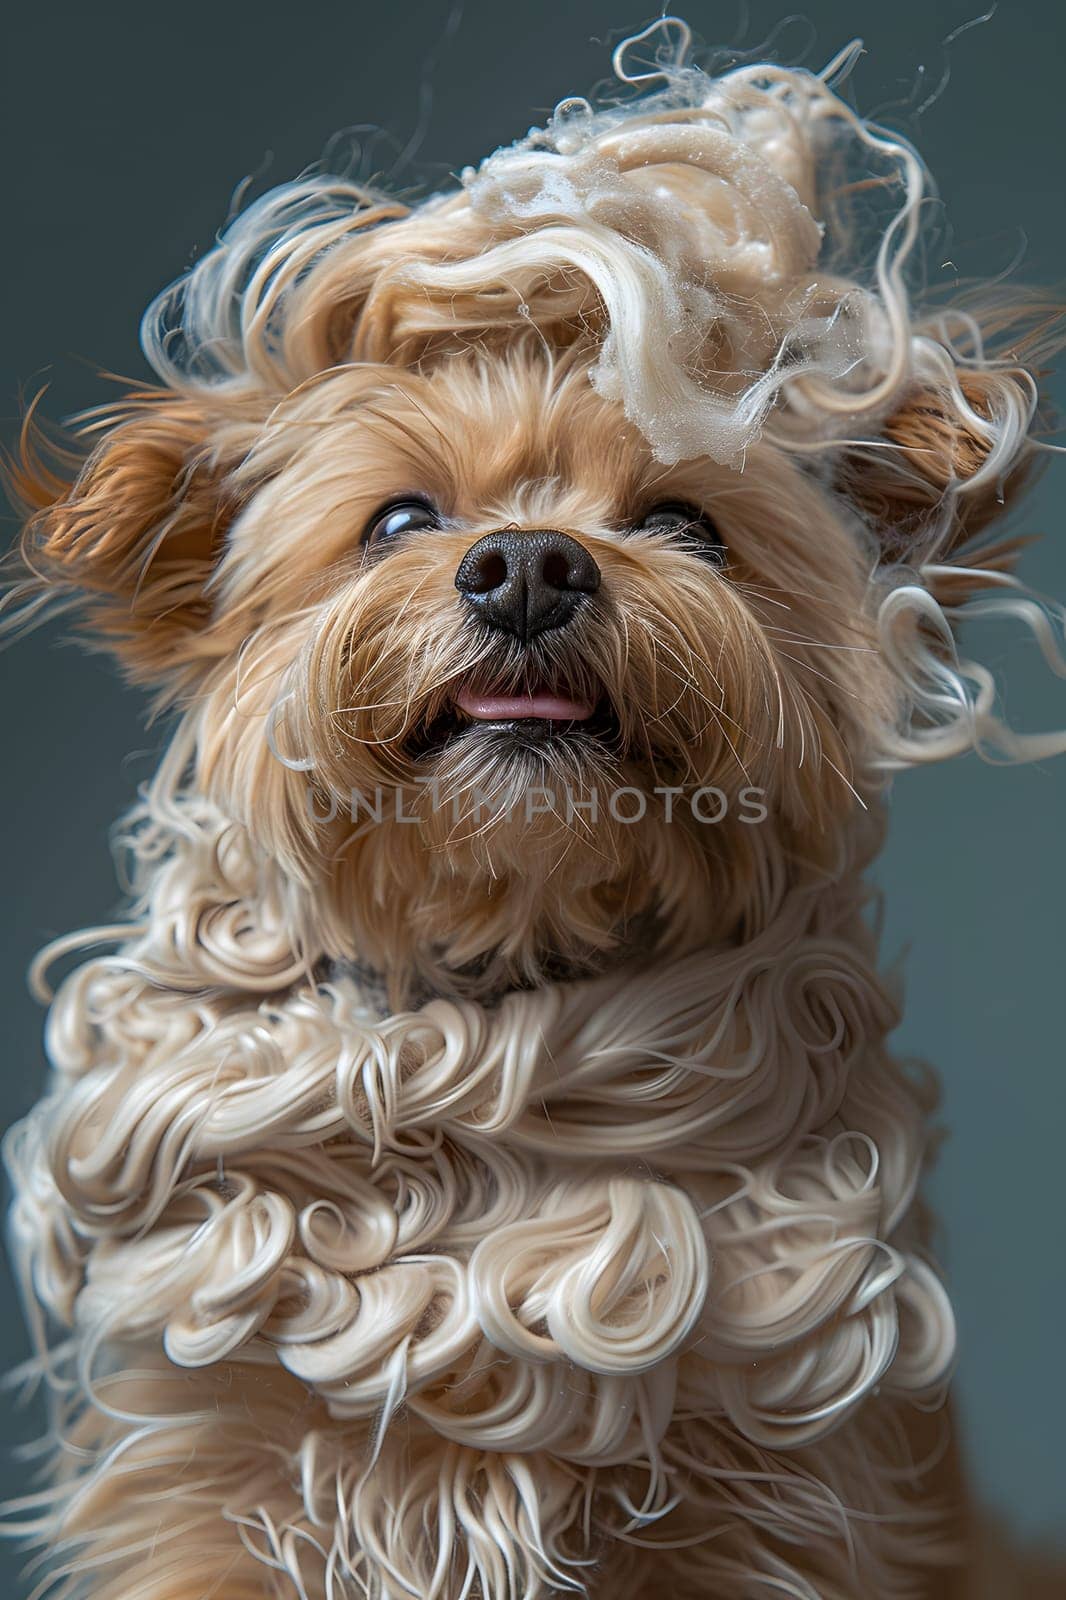 Close up of a Terrier dog wearing a wig on its snout by Nadtochiy